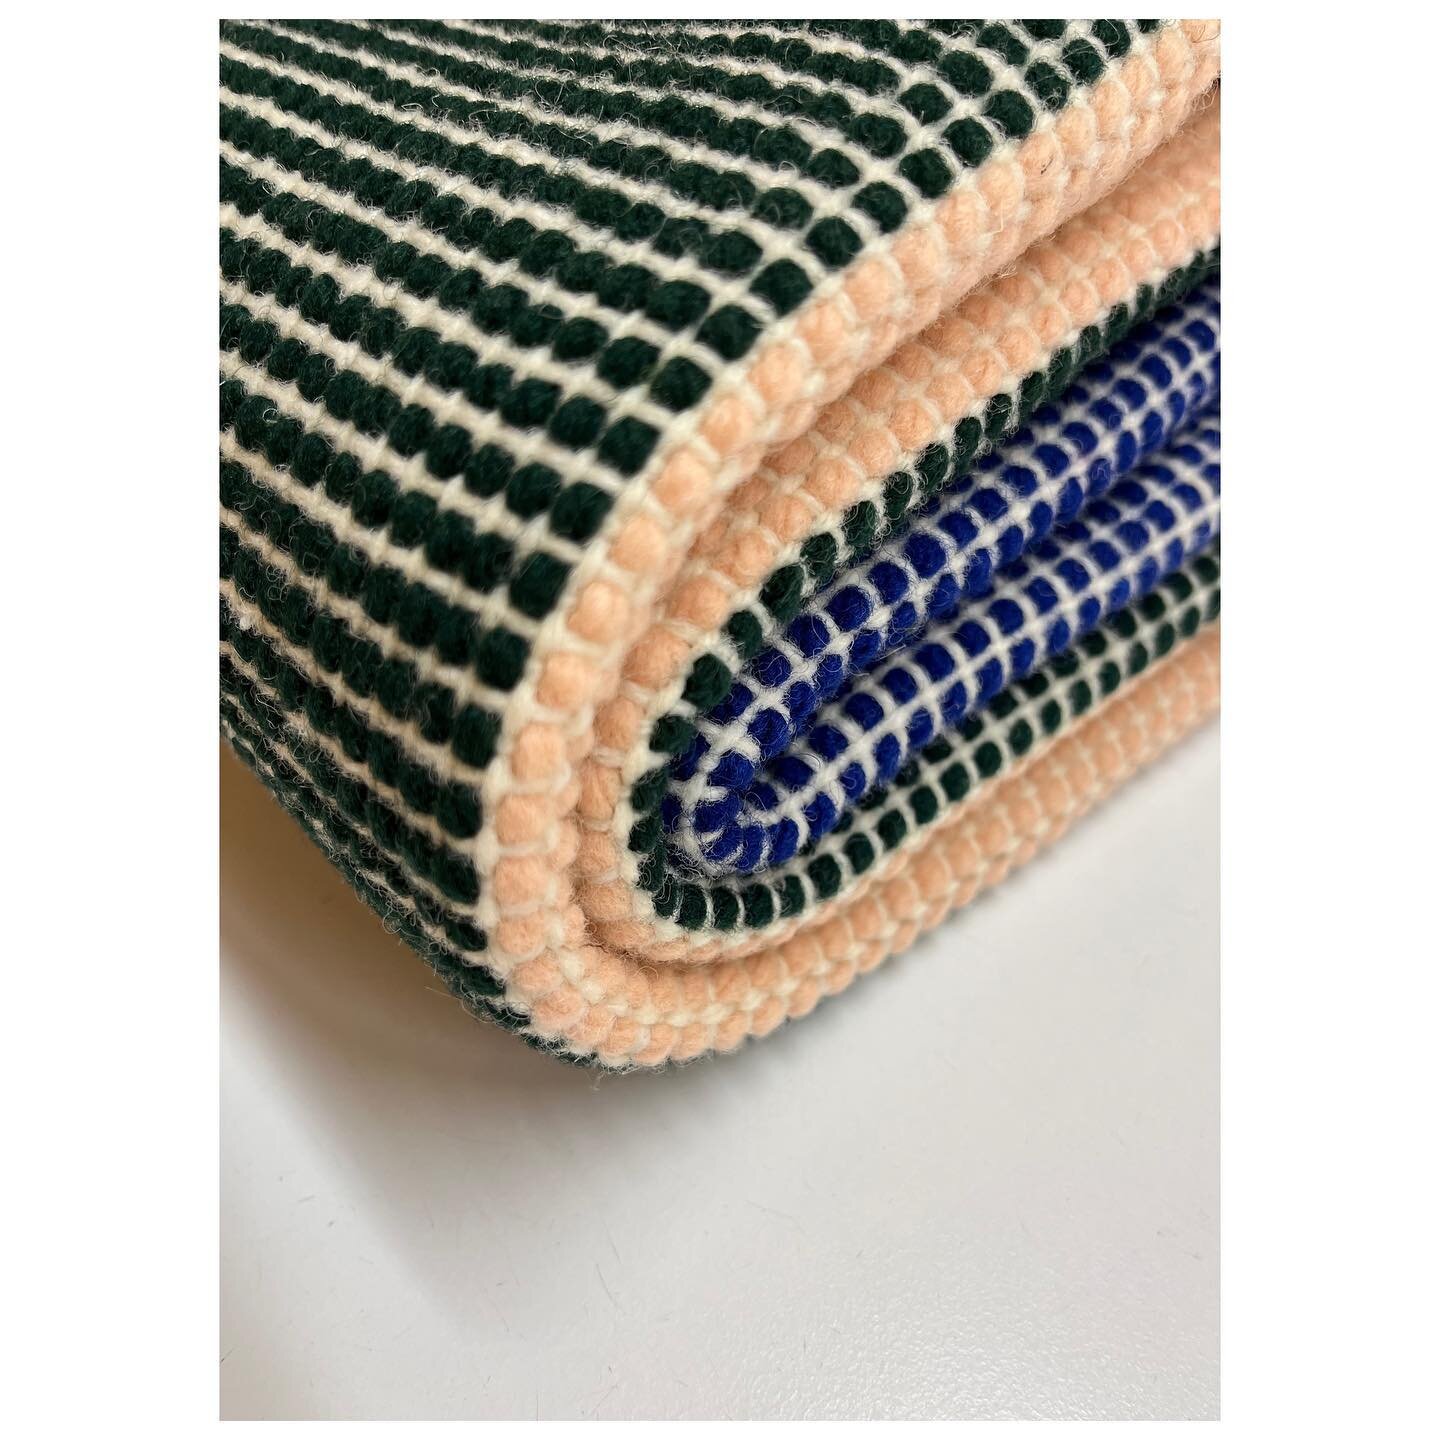 - fabric (and leftovers) for the sihl chairs @studio_krach 

#textiledesign #handwoven #materialmatters #swisswool #swissmade #localproduction #madeinzurich #smalllabel #veralynntextiledesign